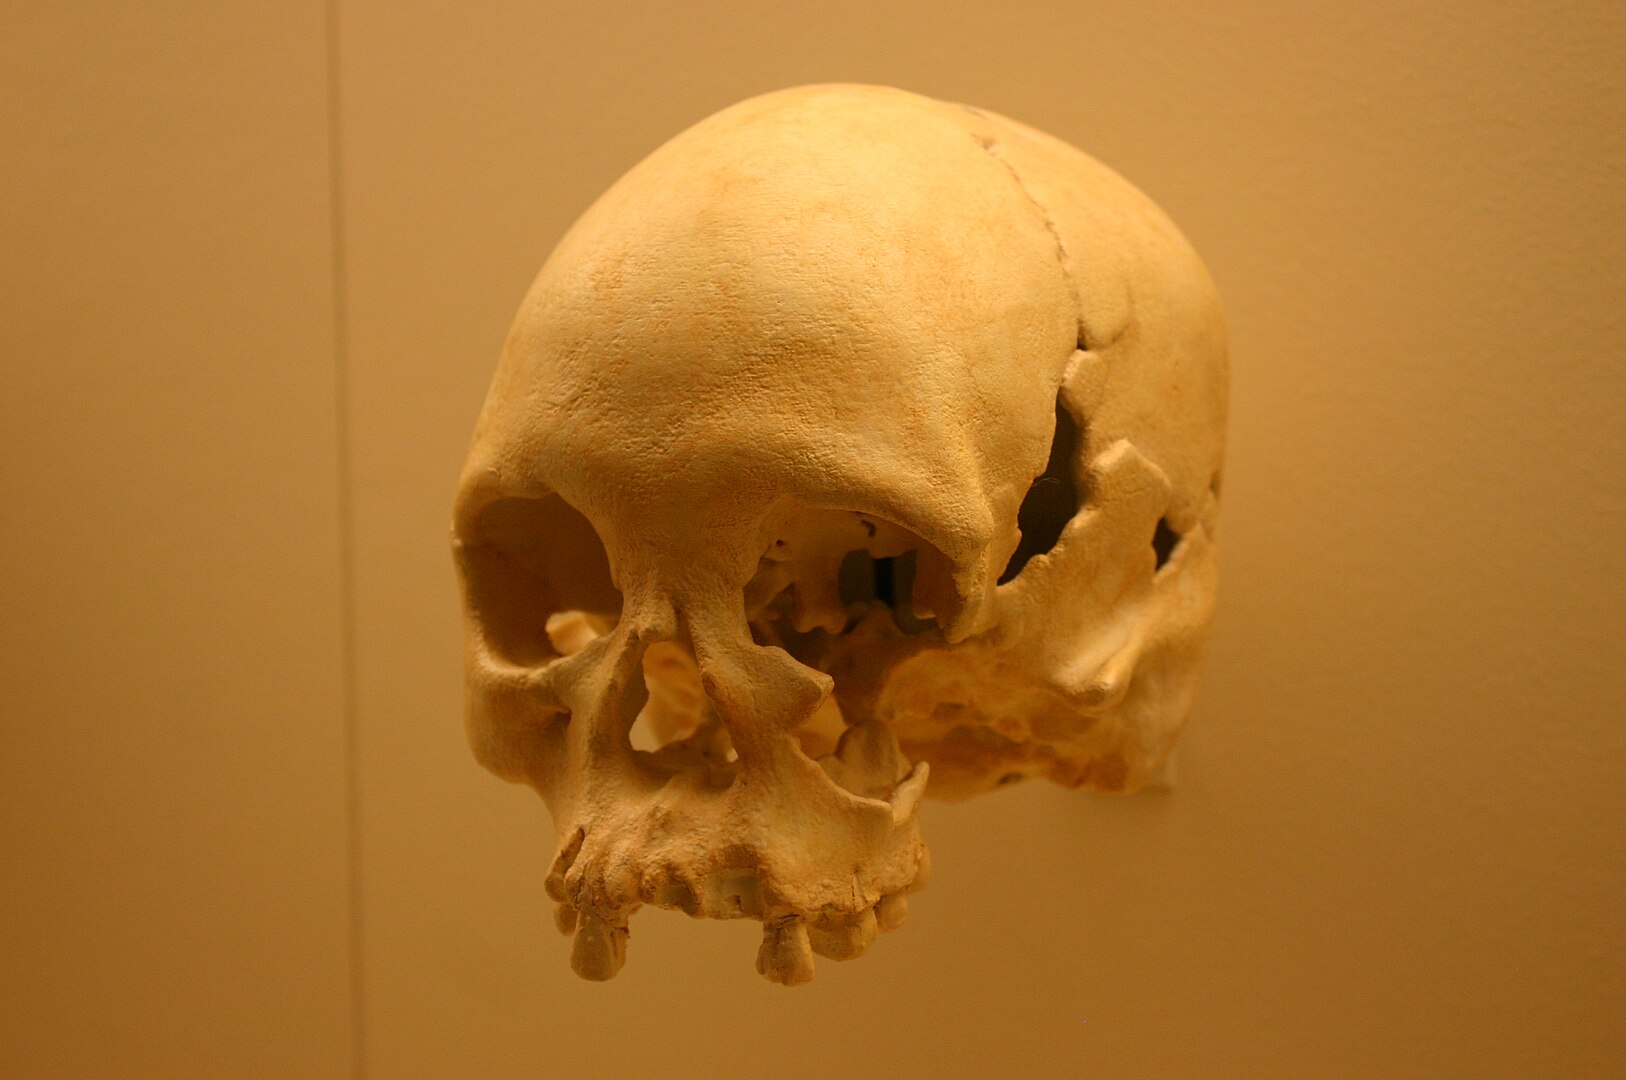 A cast of Luzia's skull at the National Museum of Natural History in Washington, D.C.